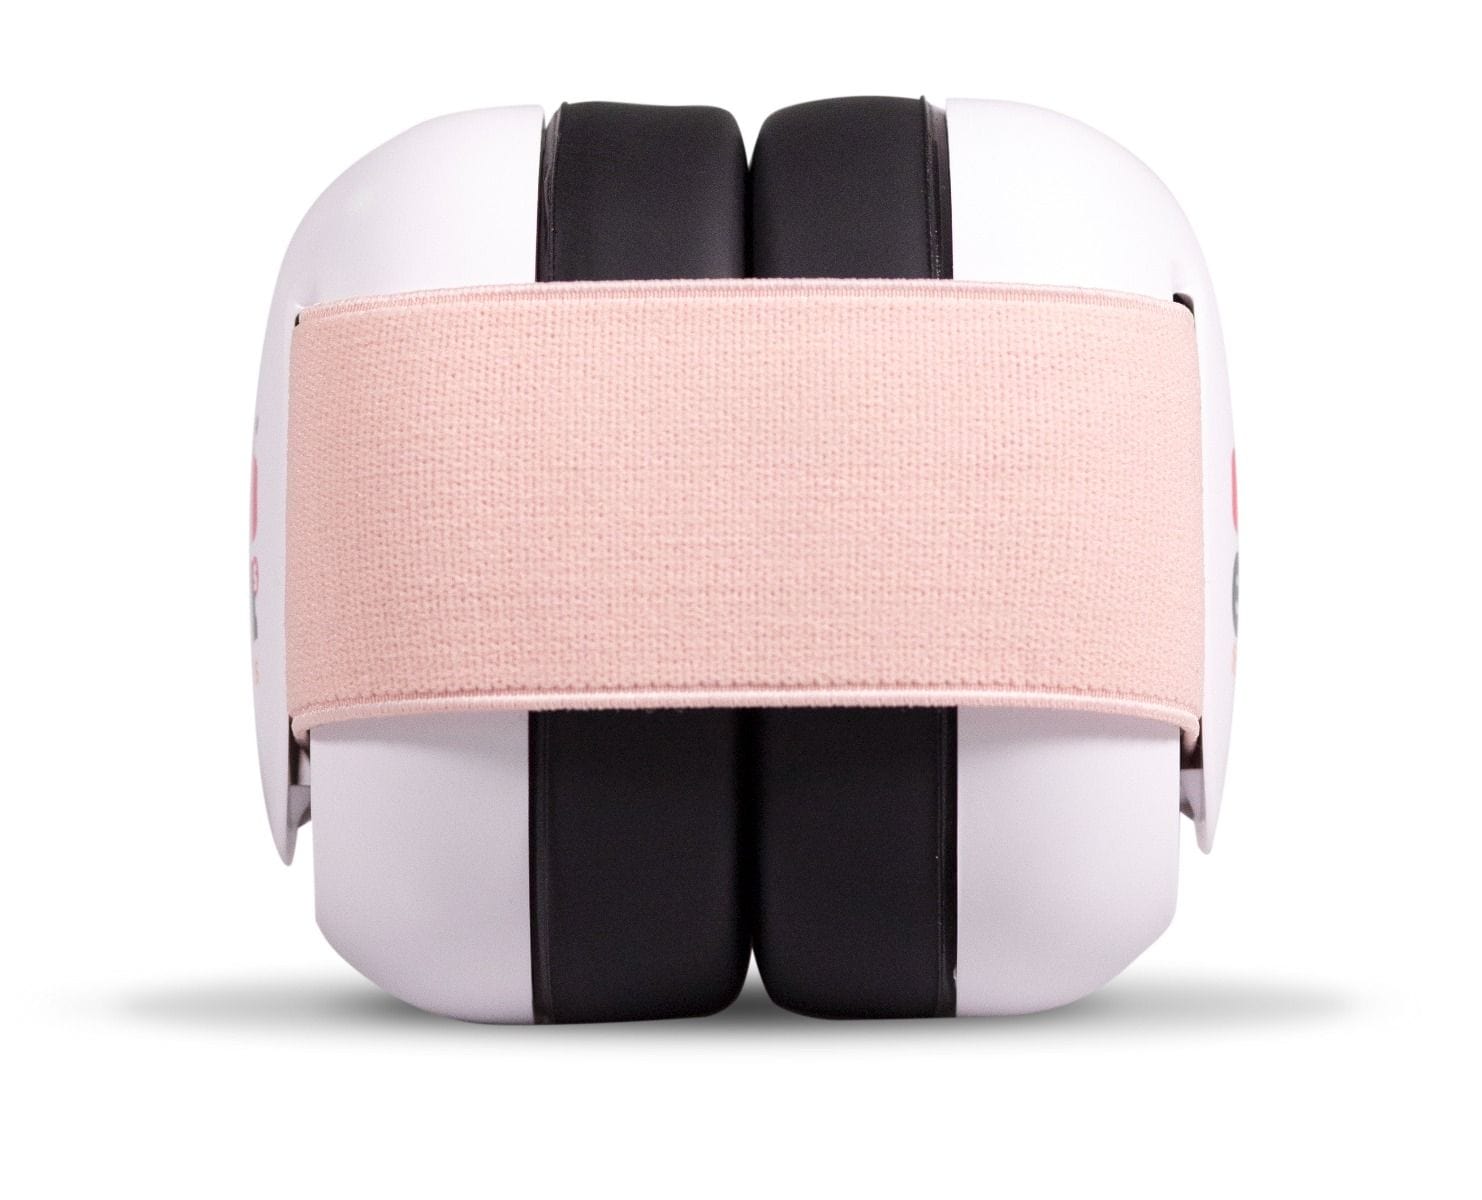 EMS For Kids Baby Accessory Baby Earmuffs - White/Coral